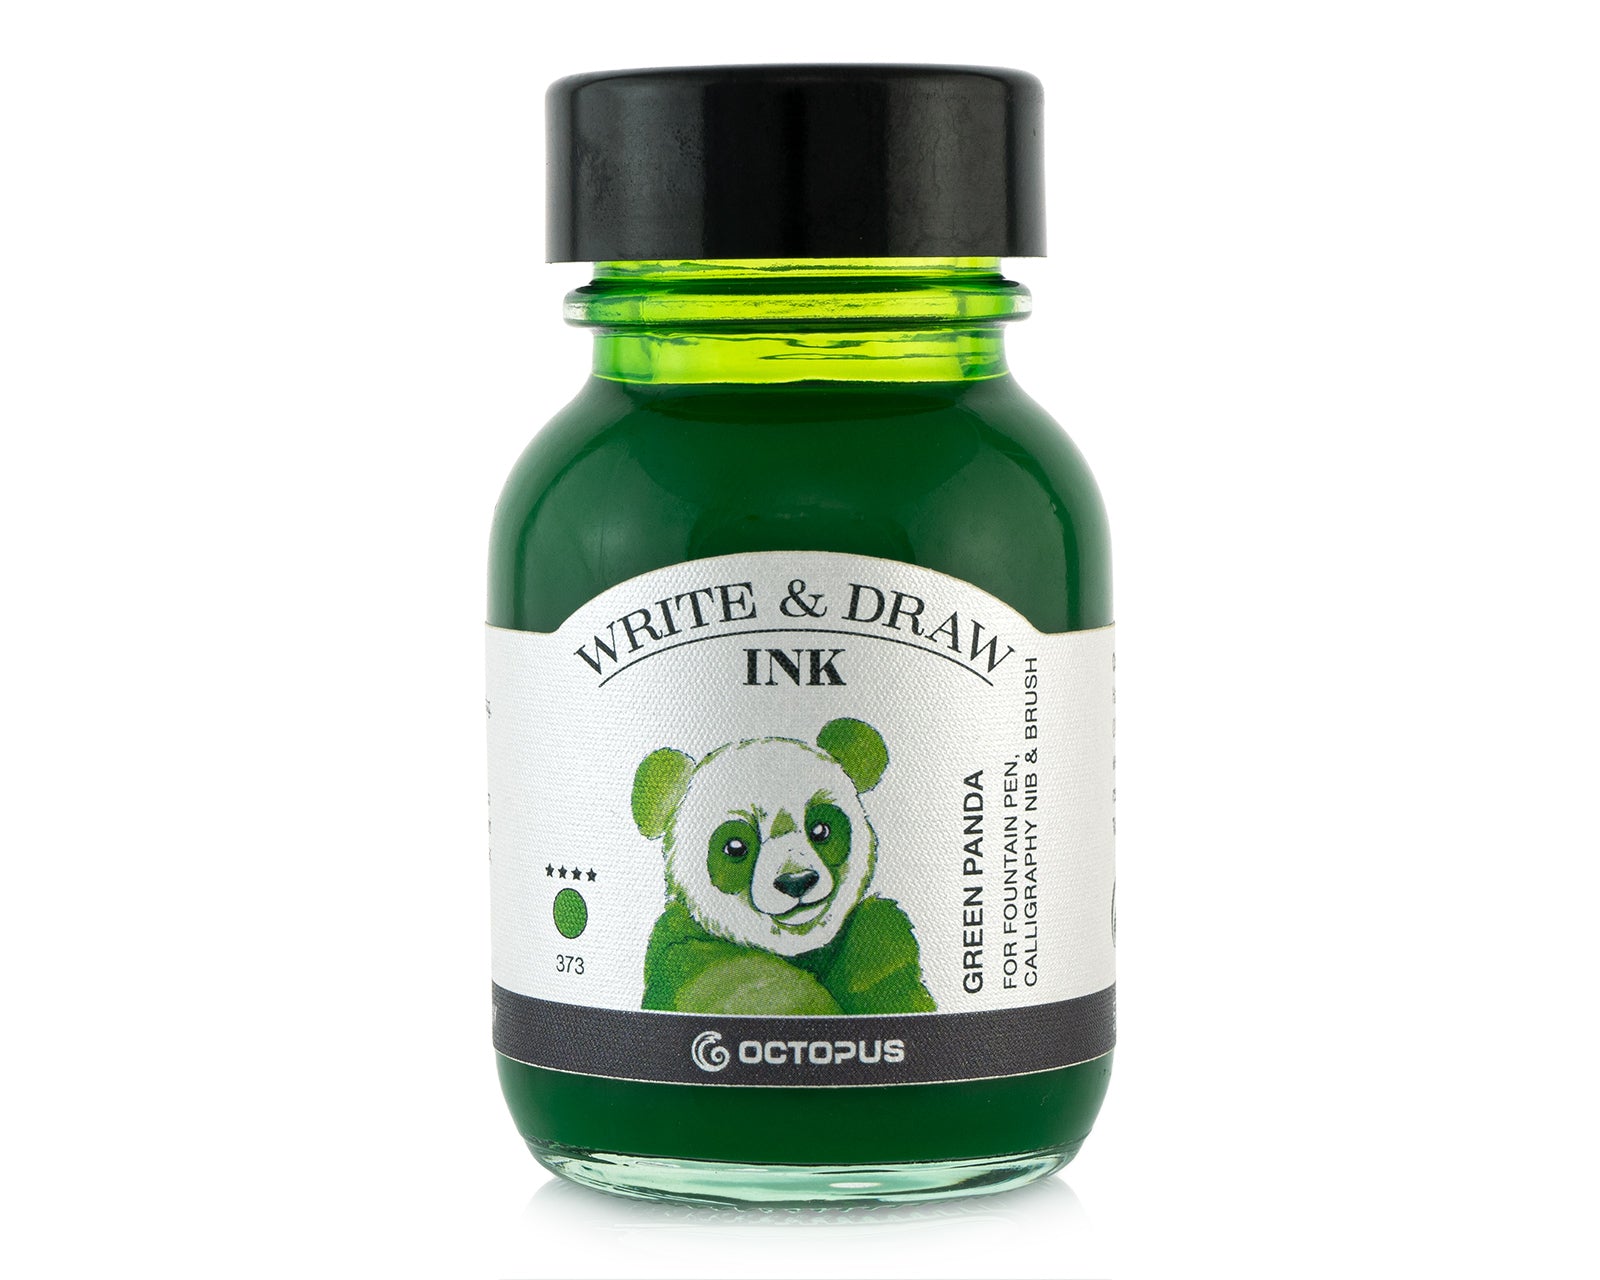 Octopus Write and Draw Ink 373 Green Panda